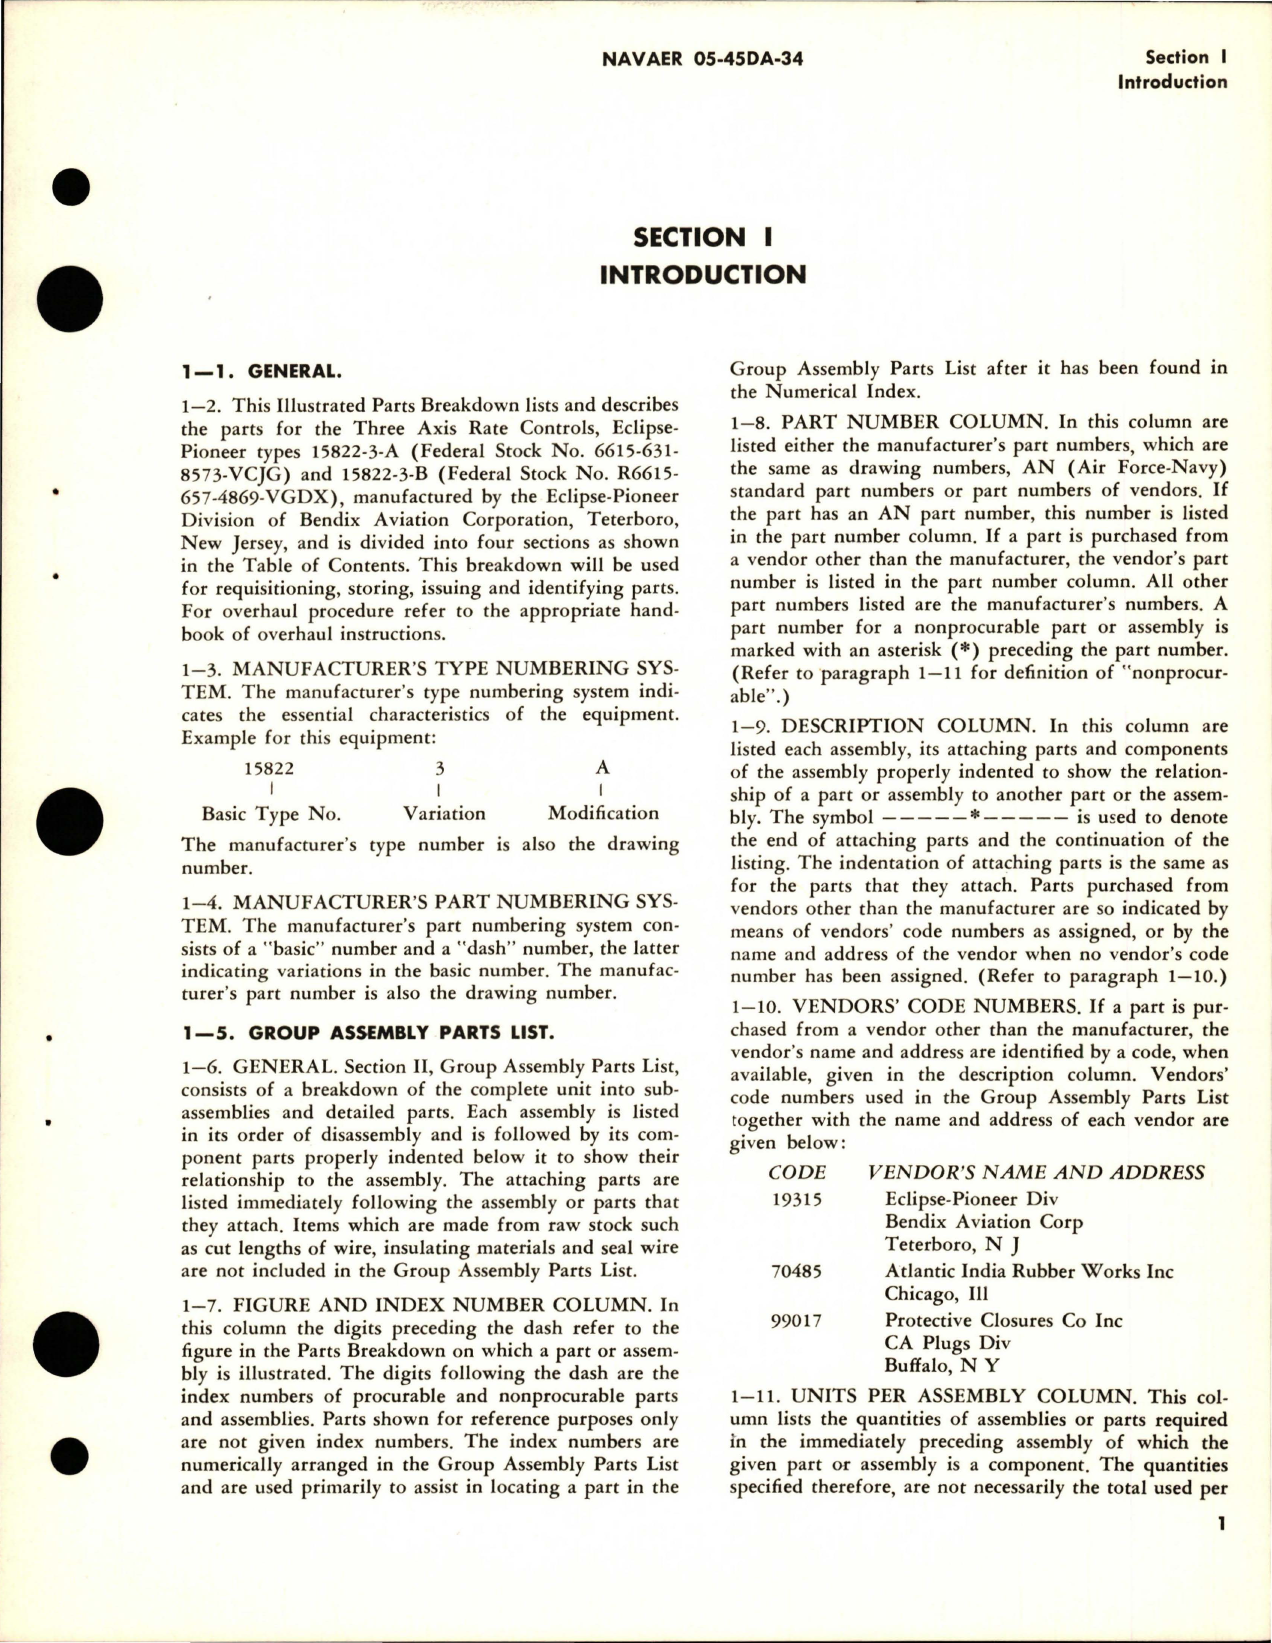 Sample page 5 from AirCorps Library document: Illustrated Parts Breakdown for Three Axis Rate Control - Parts 15822-3-A and 15822-3-B